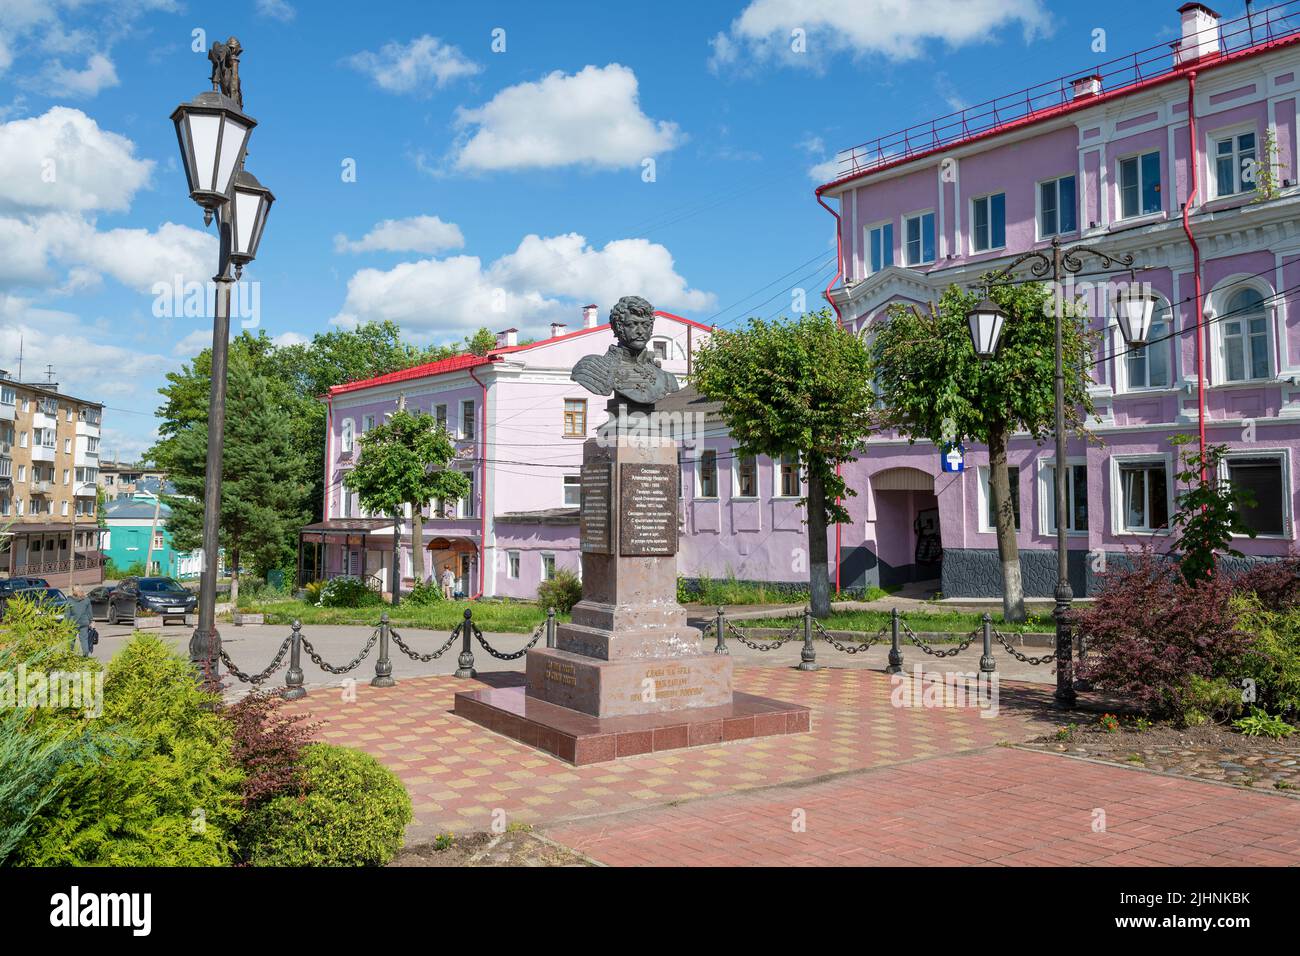 RZHEV, RUSSIA - JULY 15, 2022: Monument to the hero of the war of 1812 General Seslavin Aleksandur Nikitich on a sunny July day Stock Photo